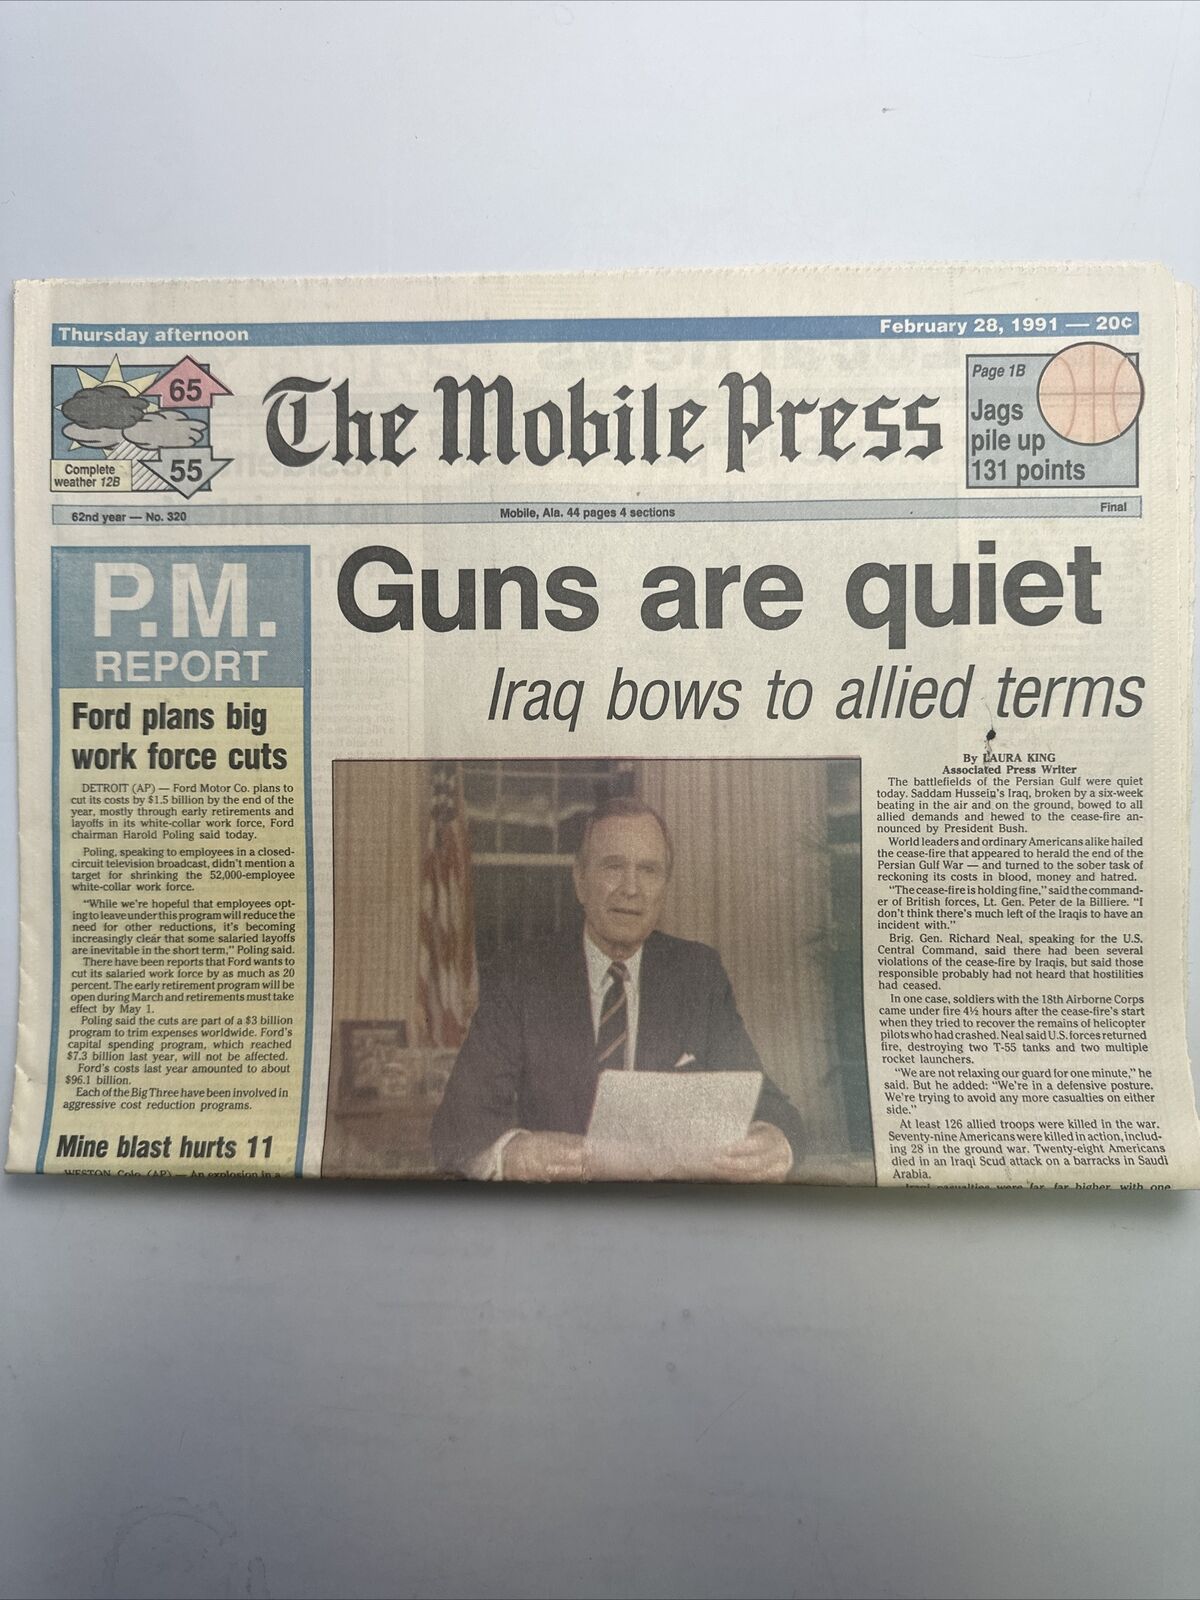 The Mobile Press Register, February 28th, 1991 ‘Guns are Quiet’ Edition